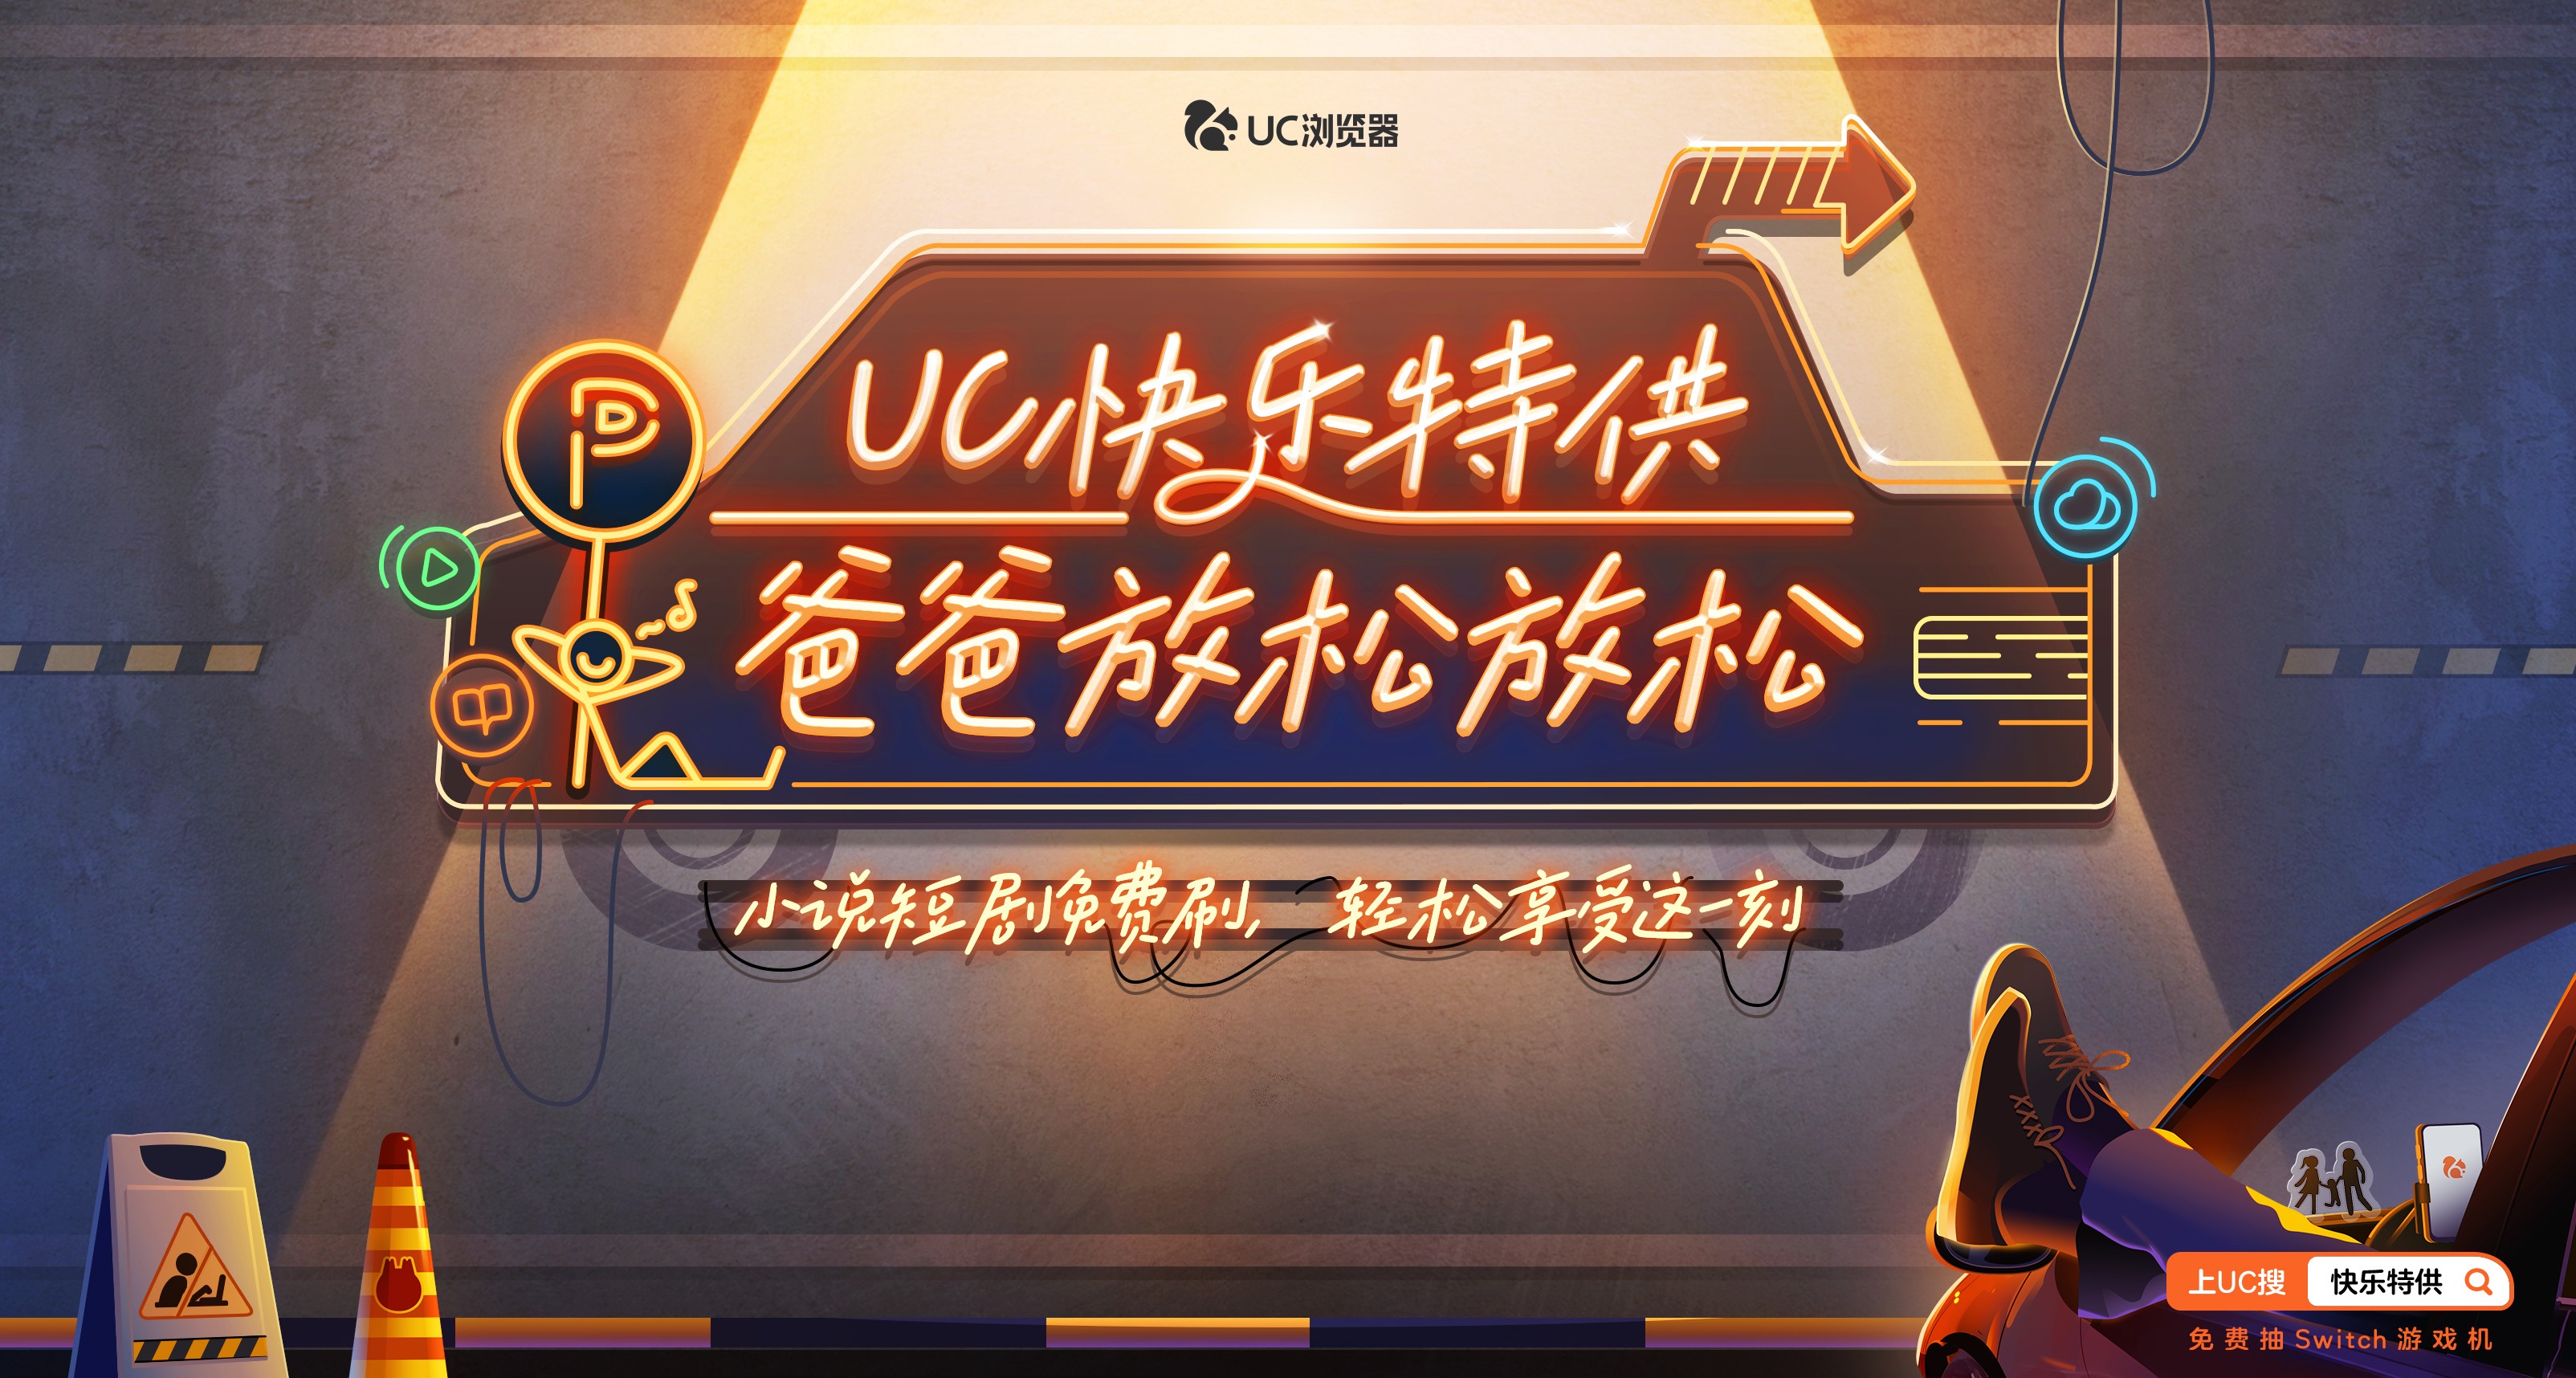  UC browser "Father's Day" special offer: hold exhibitions for dad in the parking lot, and win exclusive benefits